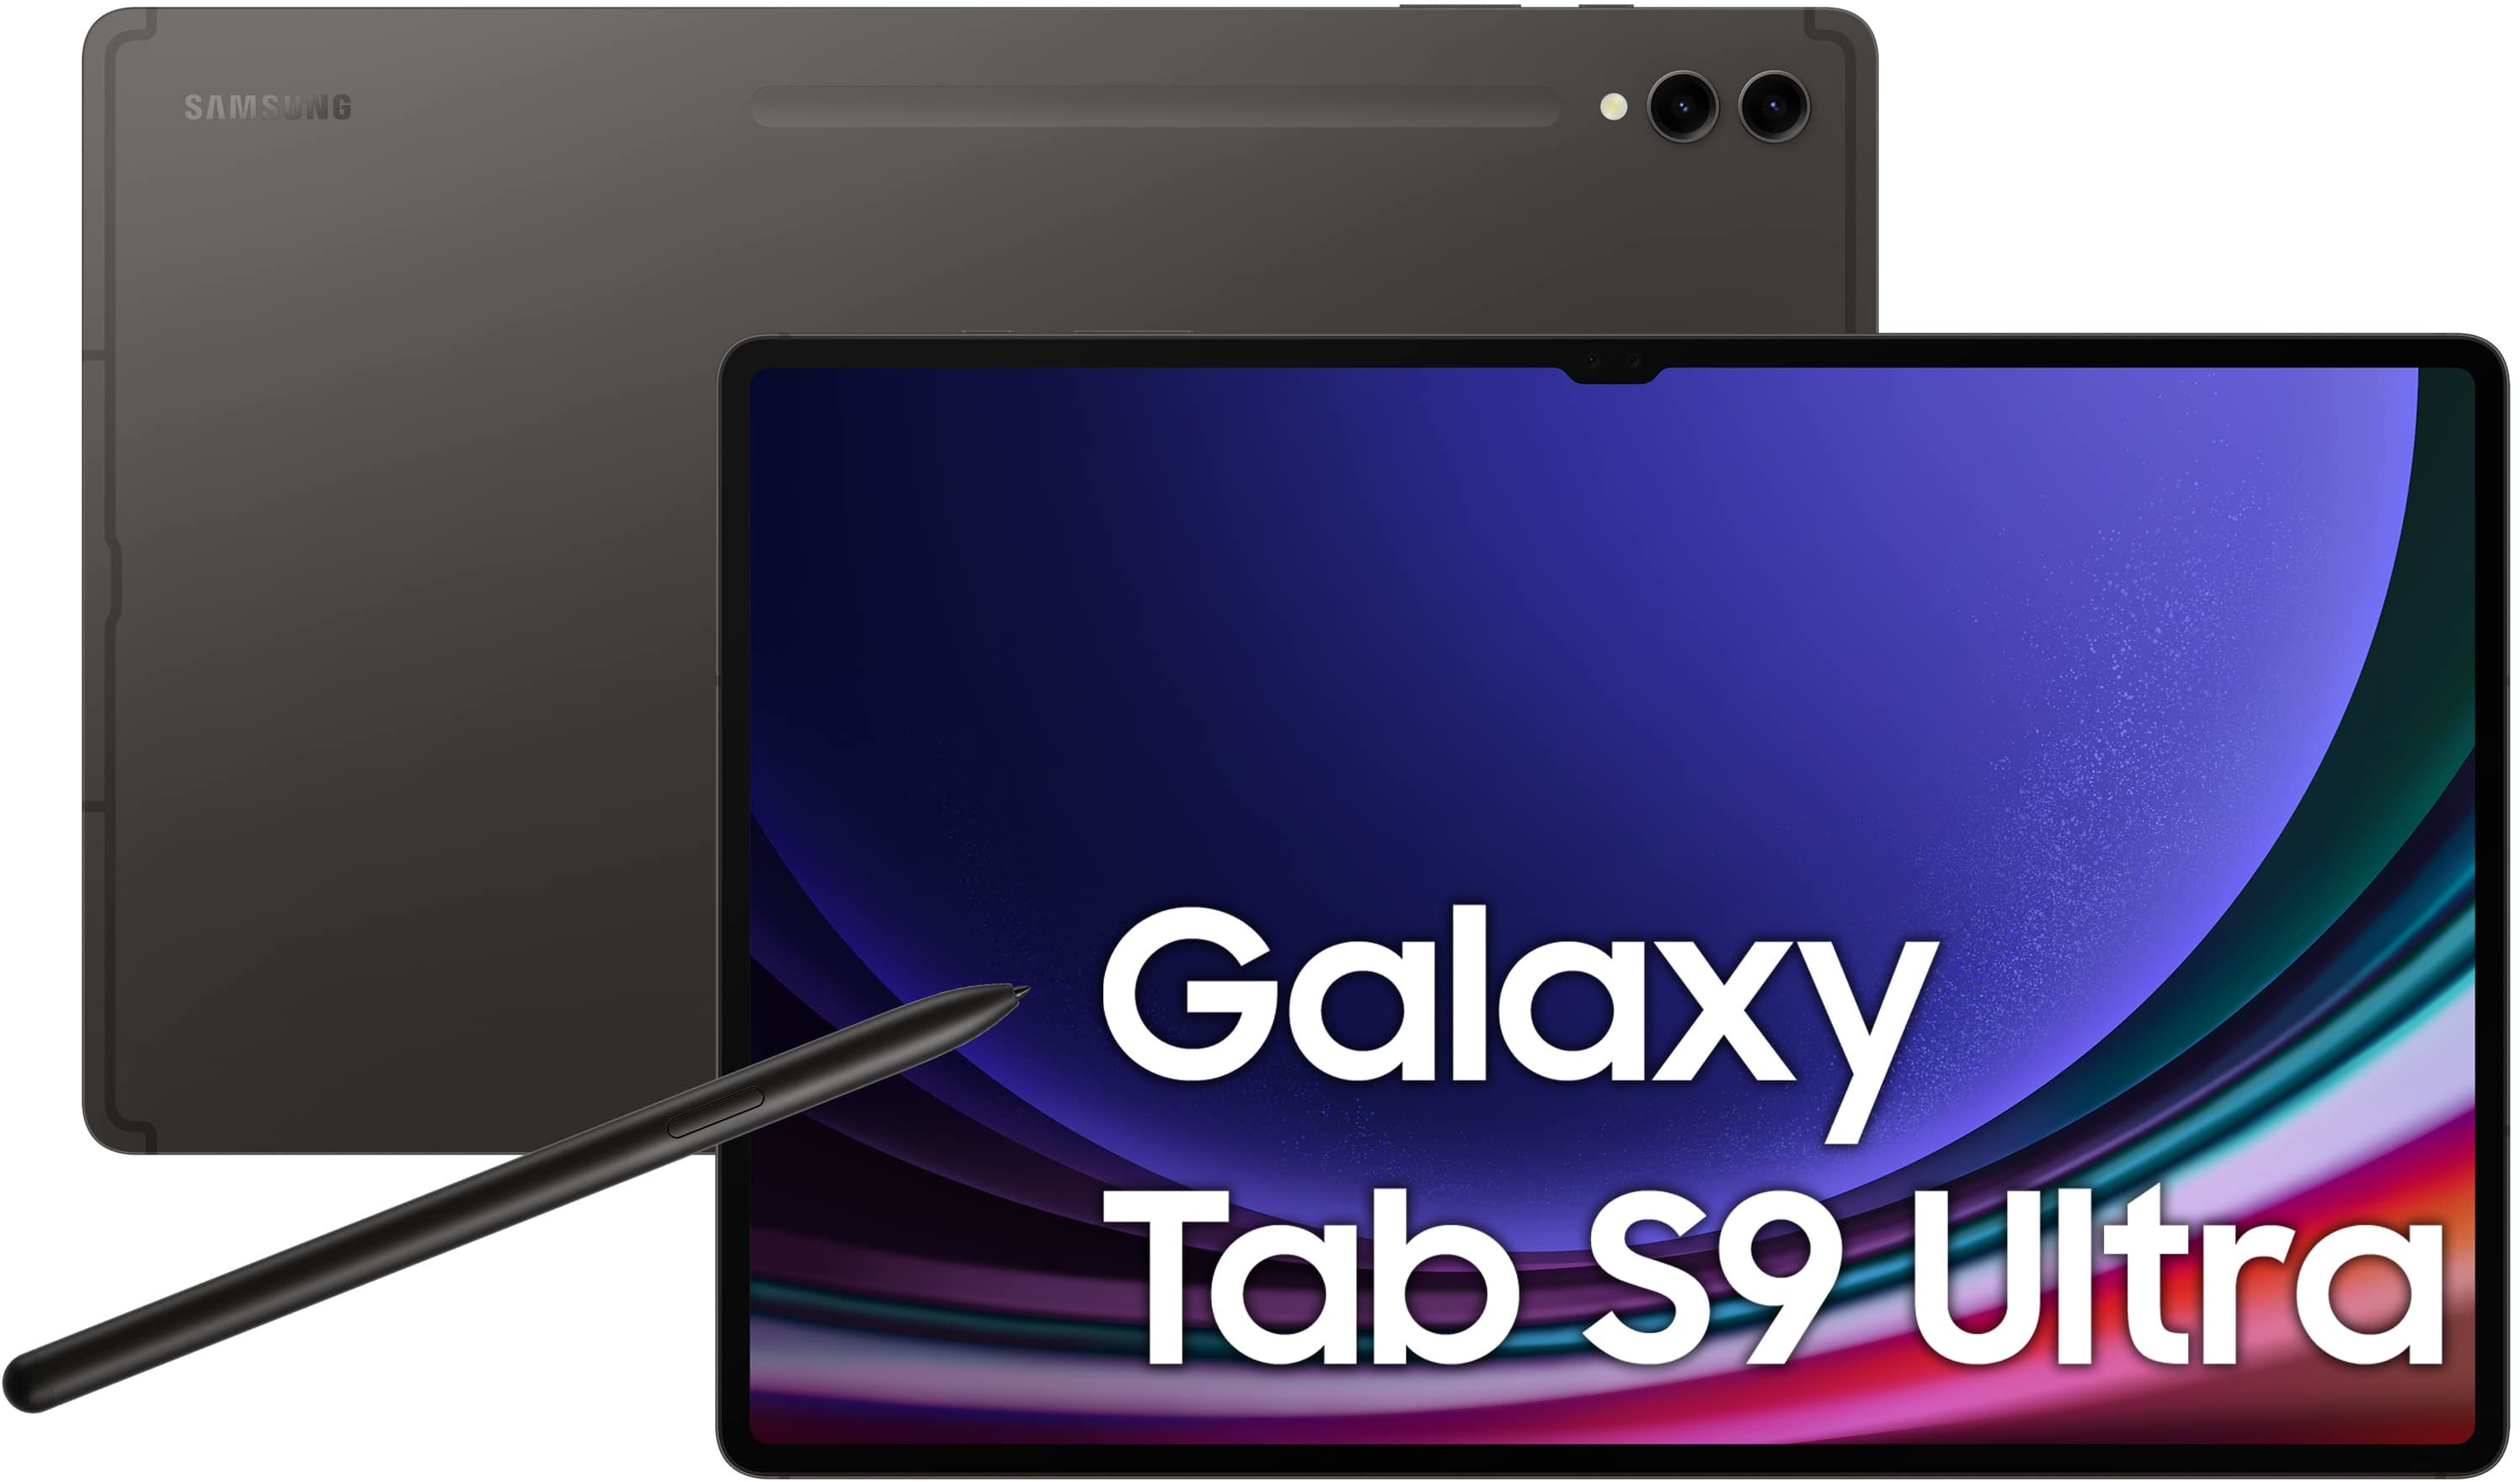 Samsung Galaxy Tab S9 Ultra Review - Livin' Large! 